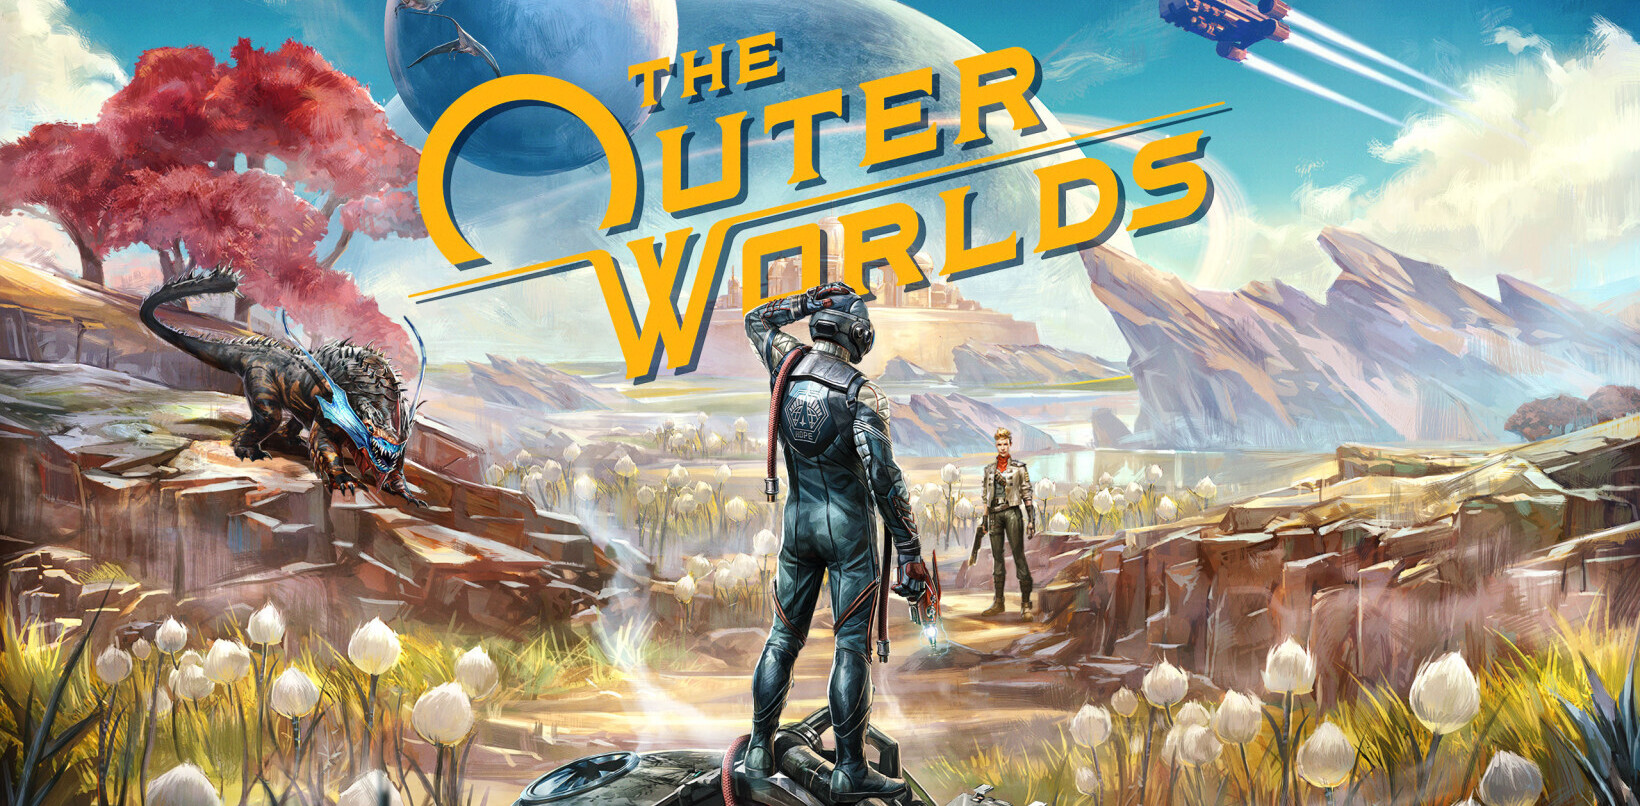 Review: The Outer Worlds is an excellent RPG for classic sci-fi fans